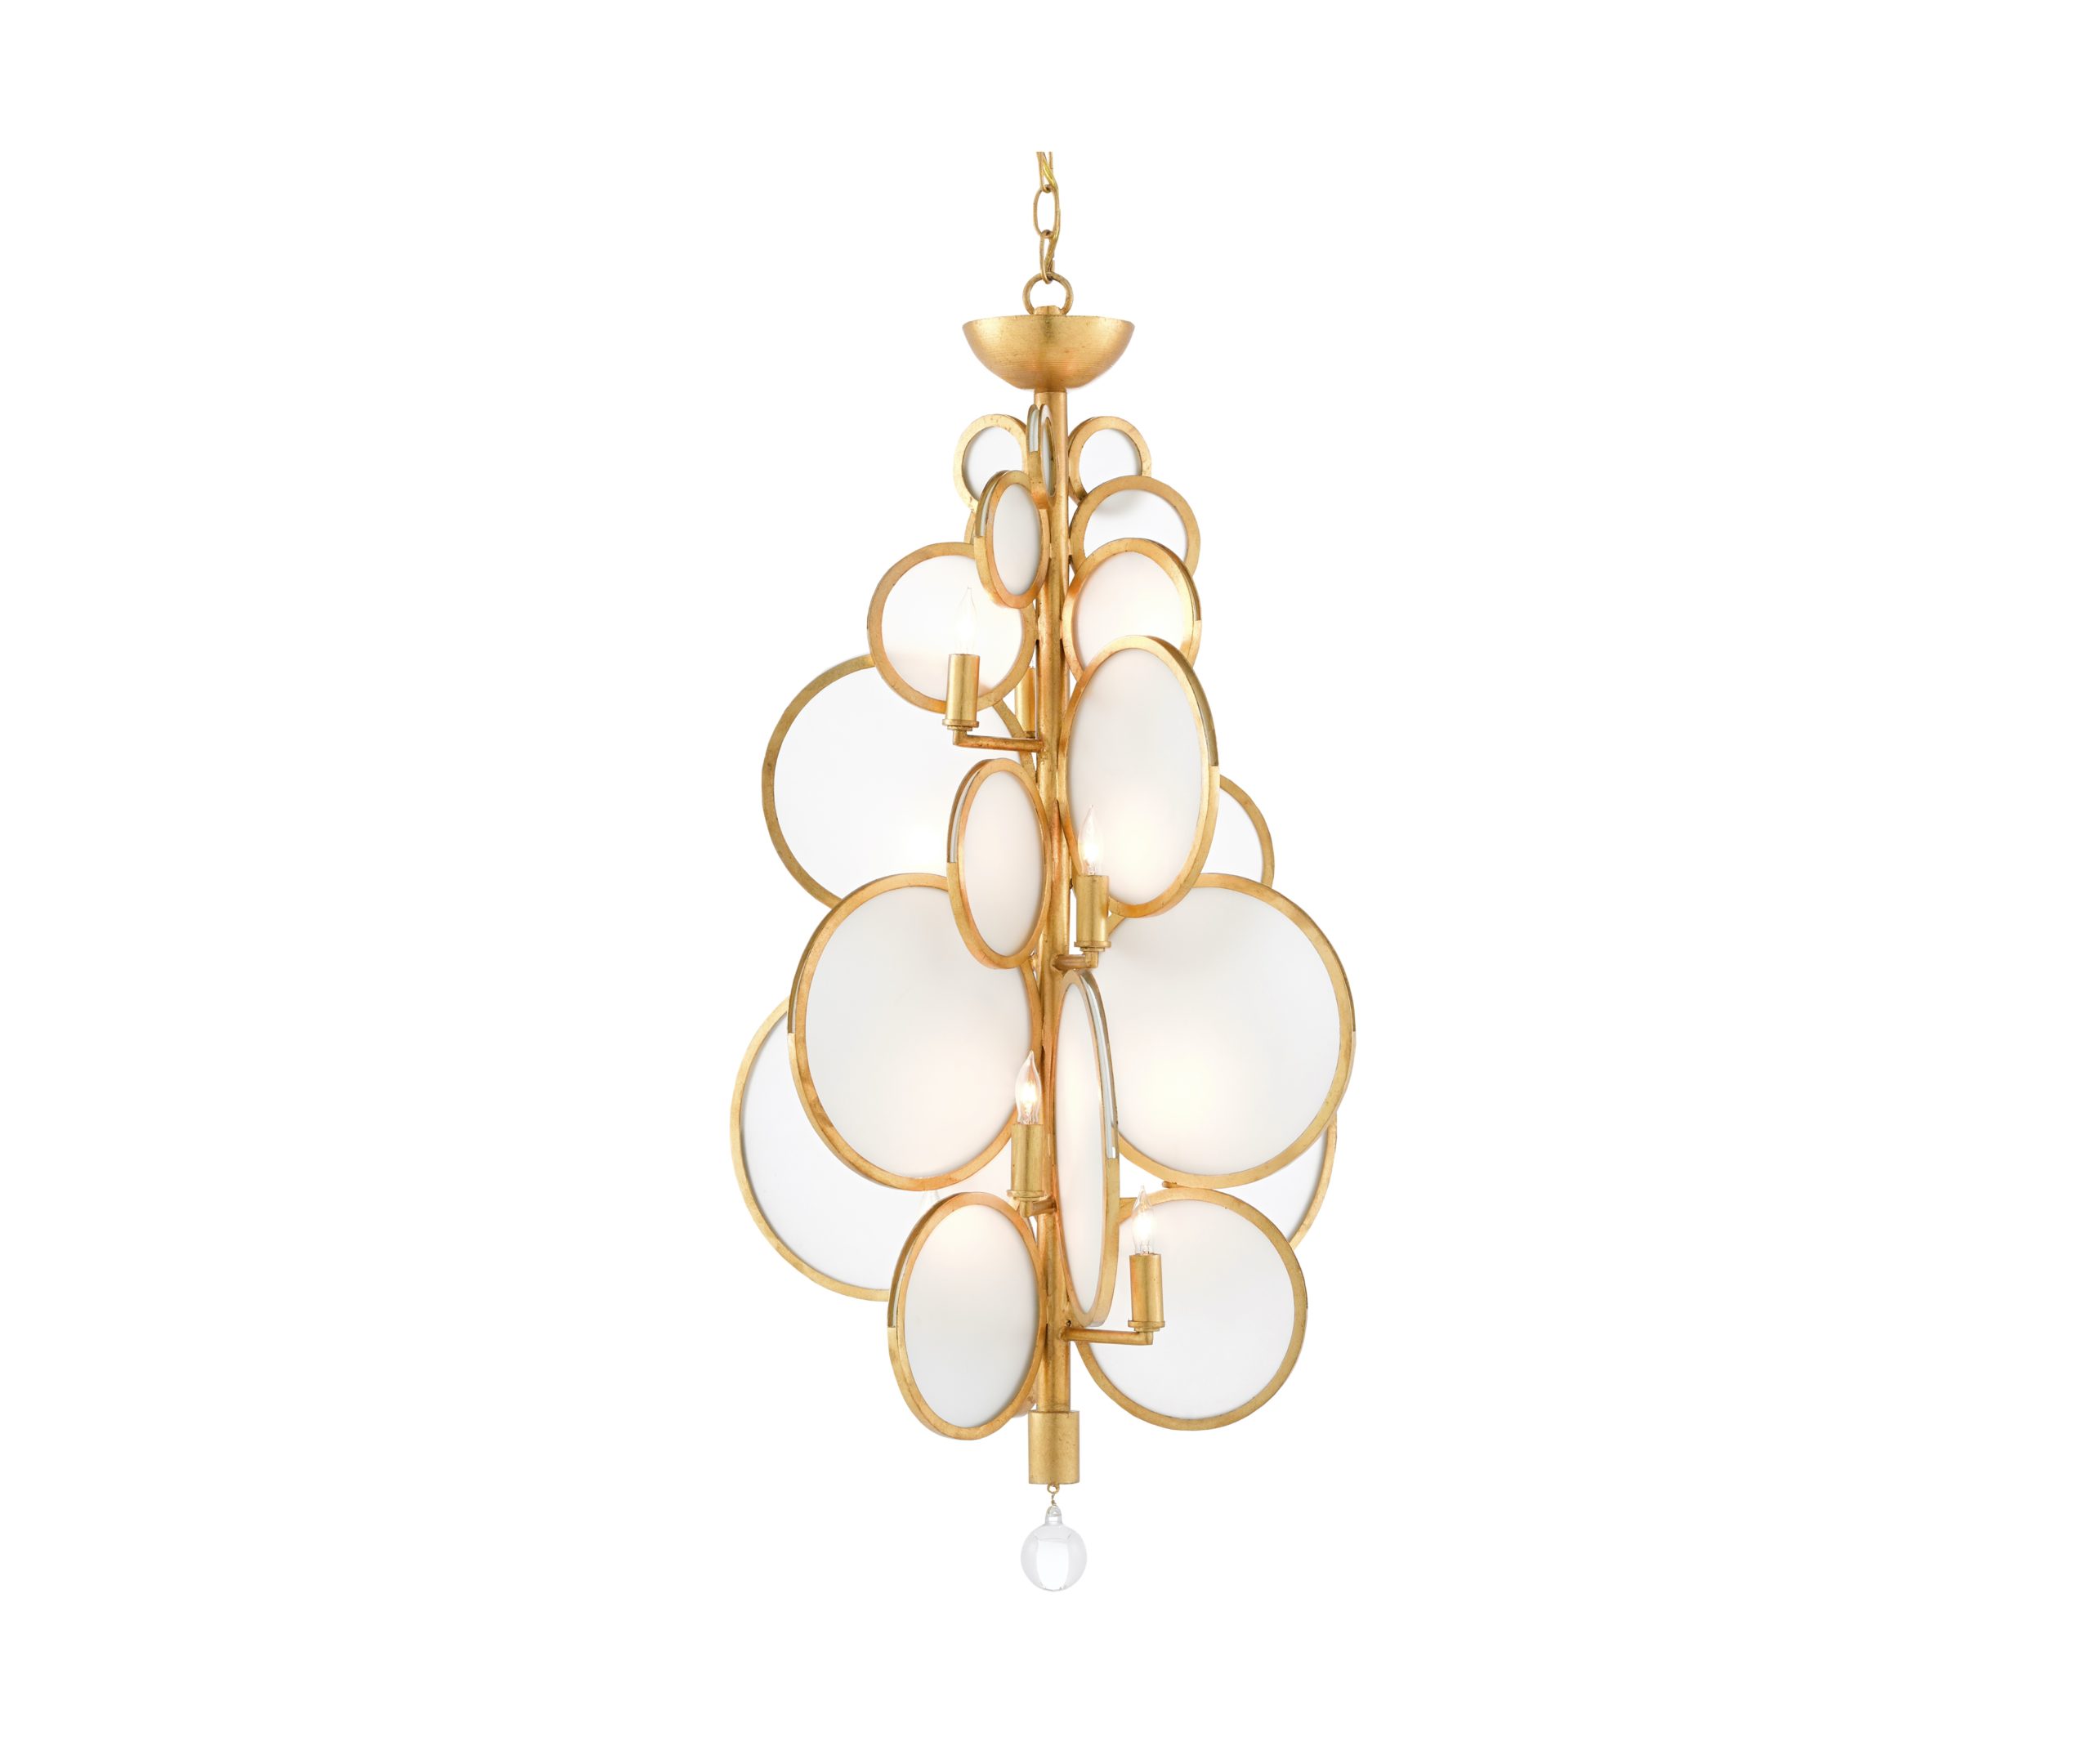 NYDC_WNWN_currey_and_co_products_dish_chandelier_9000-0437_